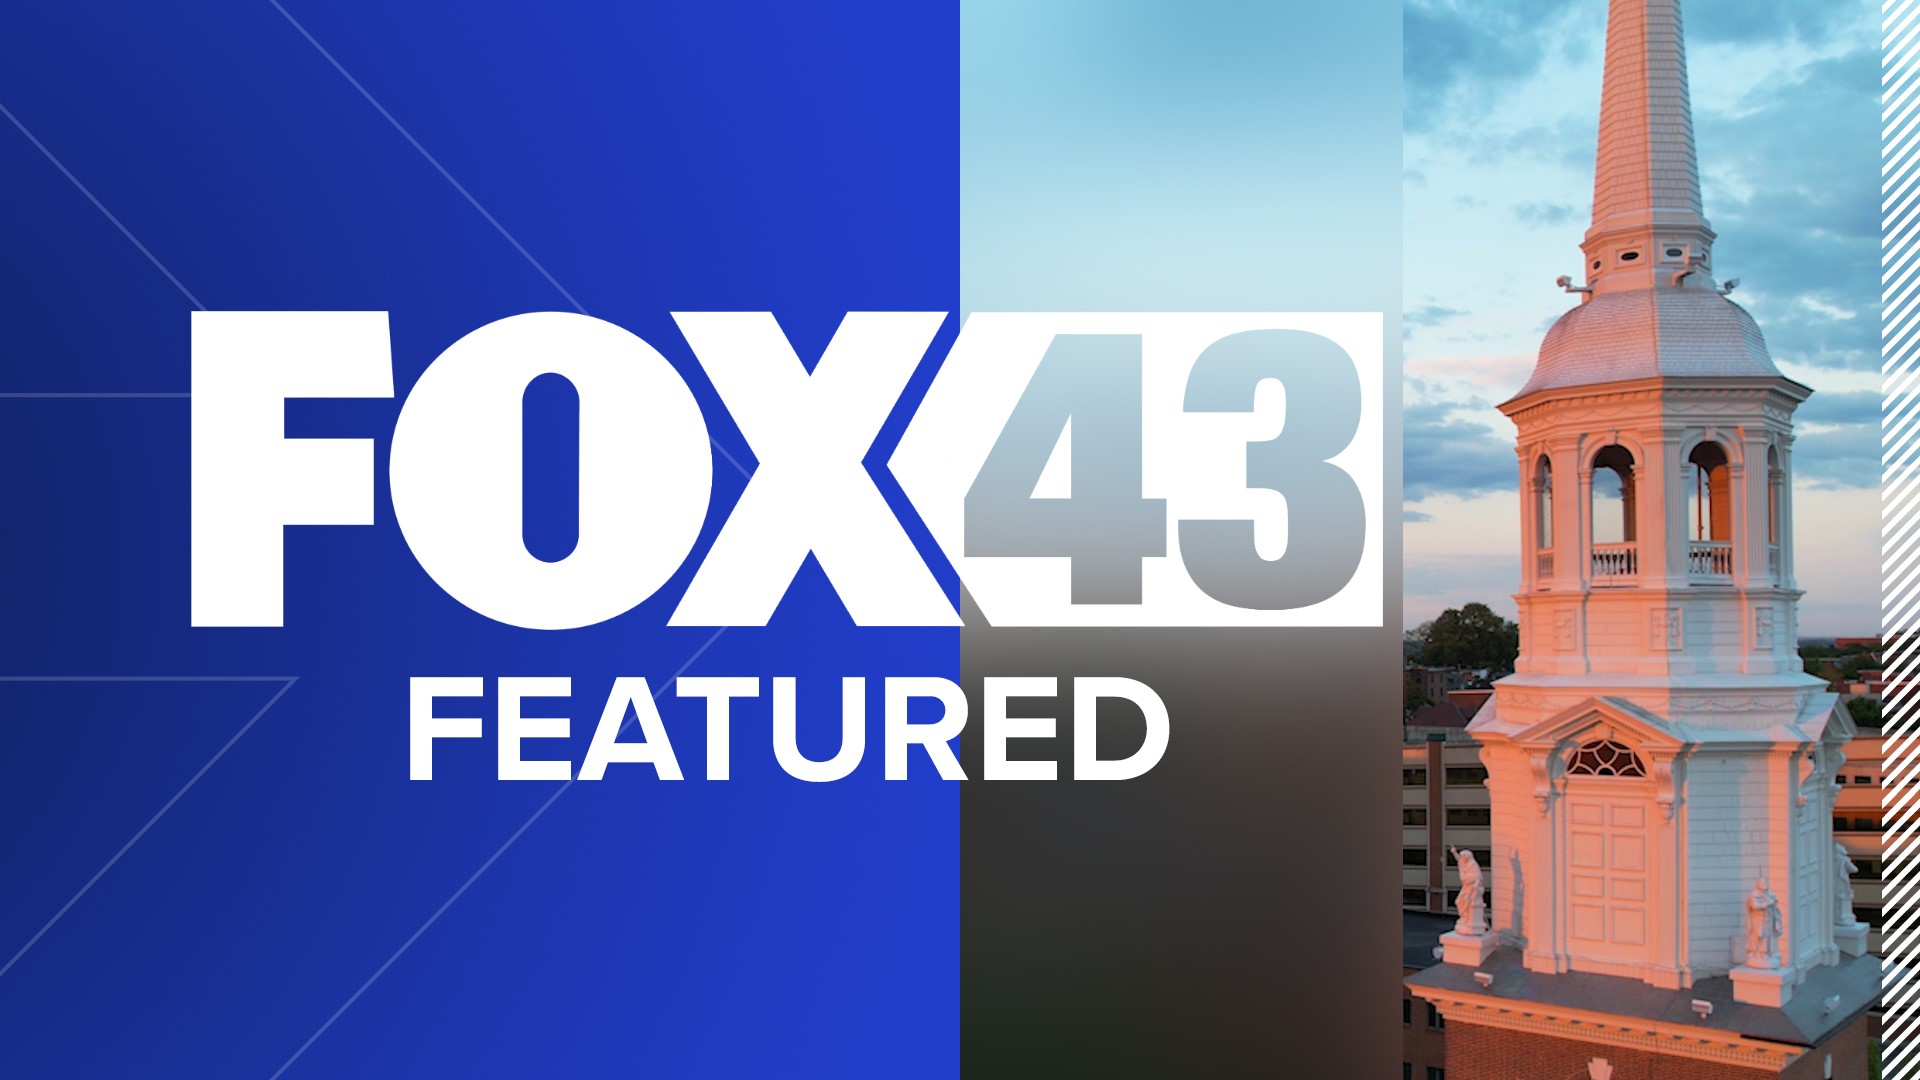 Every week, FOX43 Featured highlights the stories that have Central Pennsylvania talking.